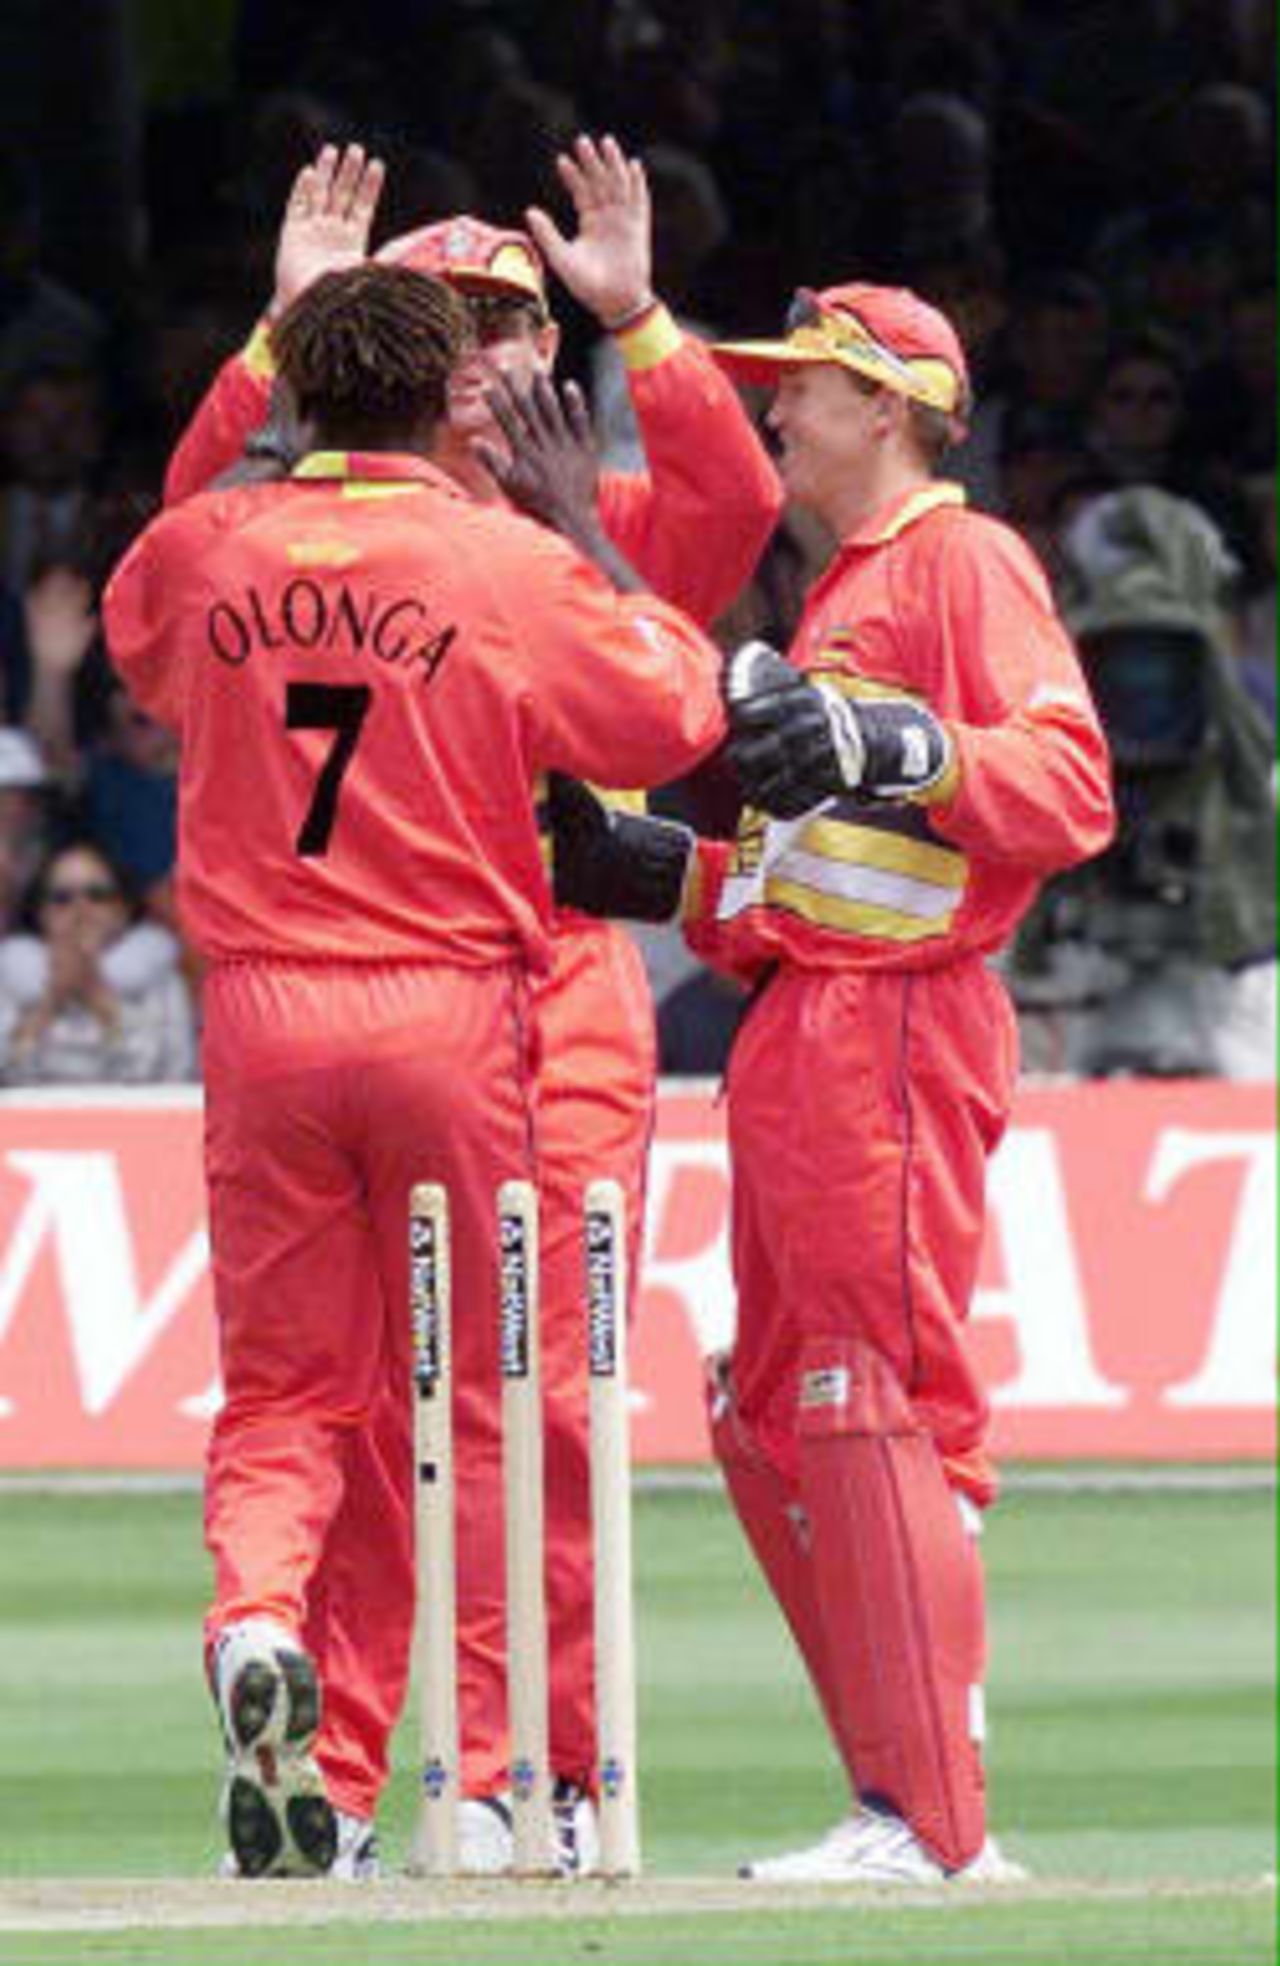 Henry Olonga celebrates after bowling out Australia`s Ricky Ponting in the match between Zimbabwe v Australia in the Cricket World Cup match at Lords 9 June 1999.